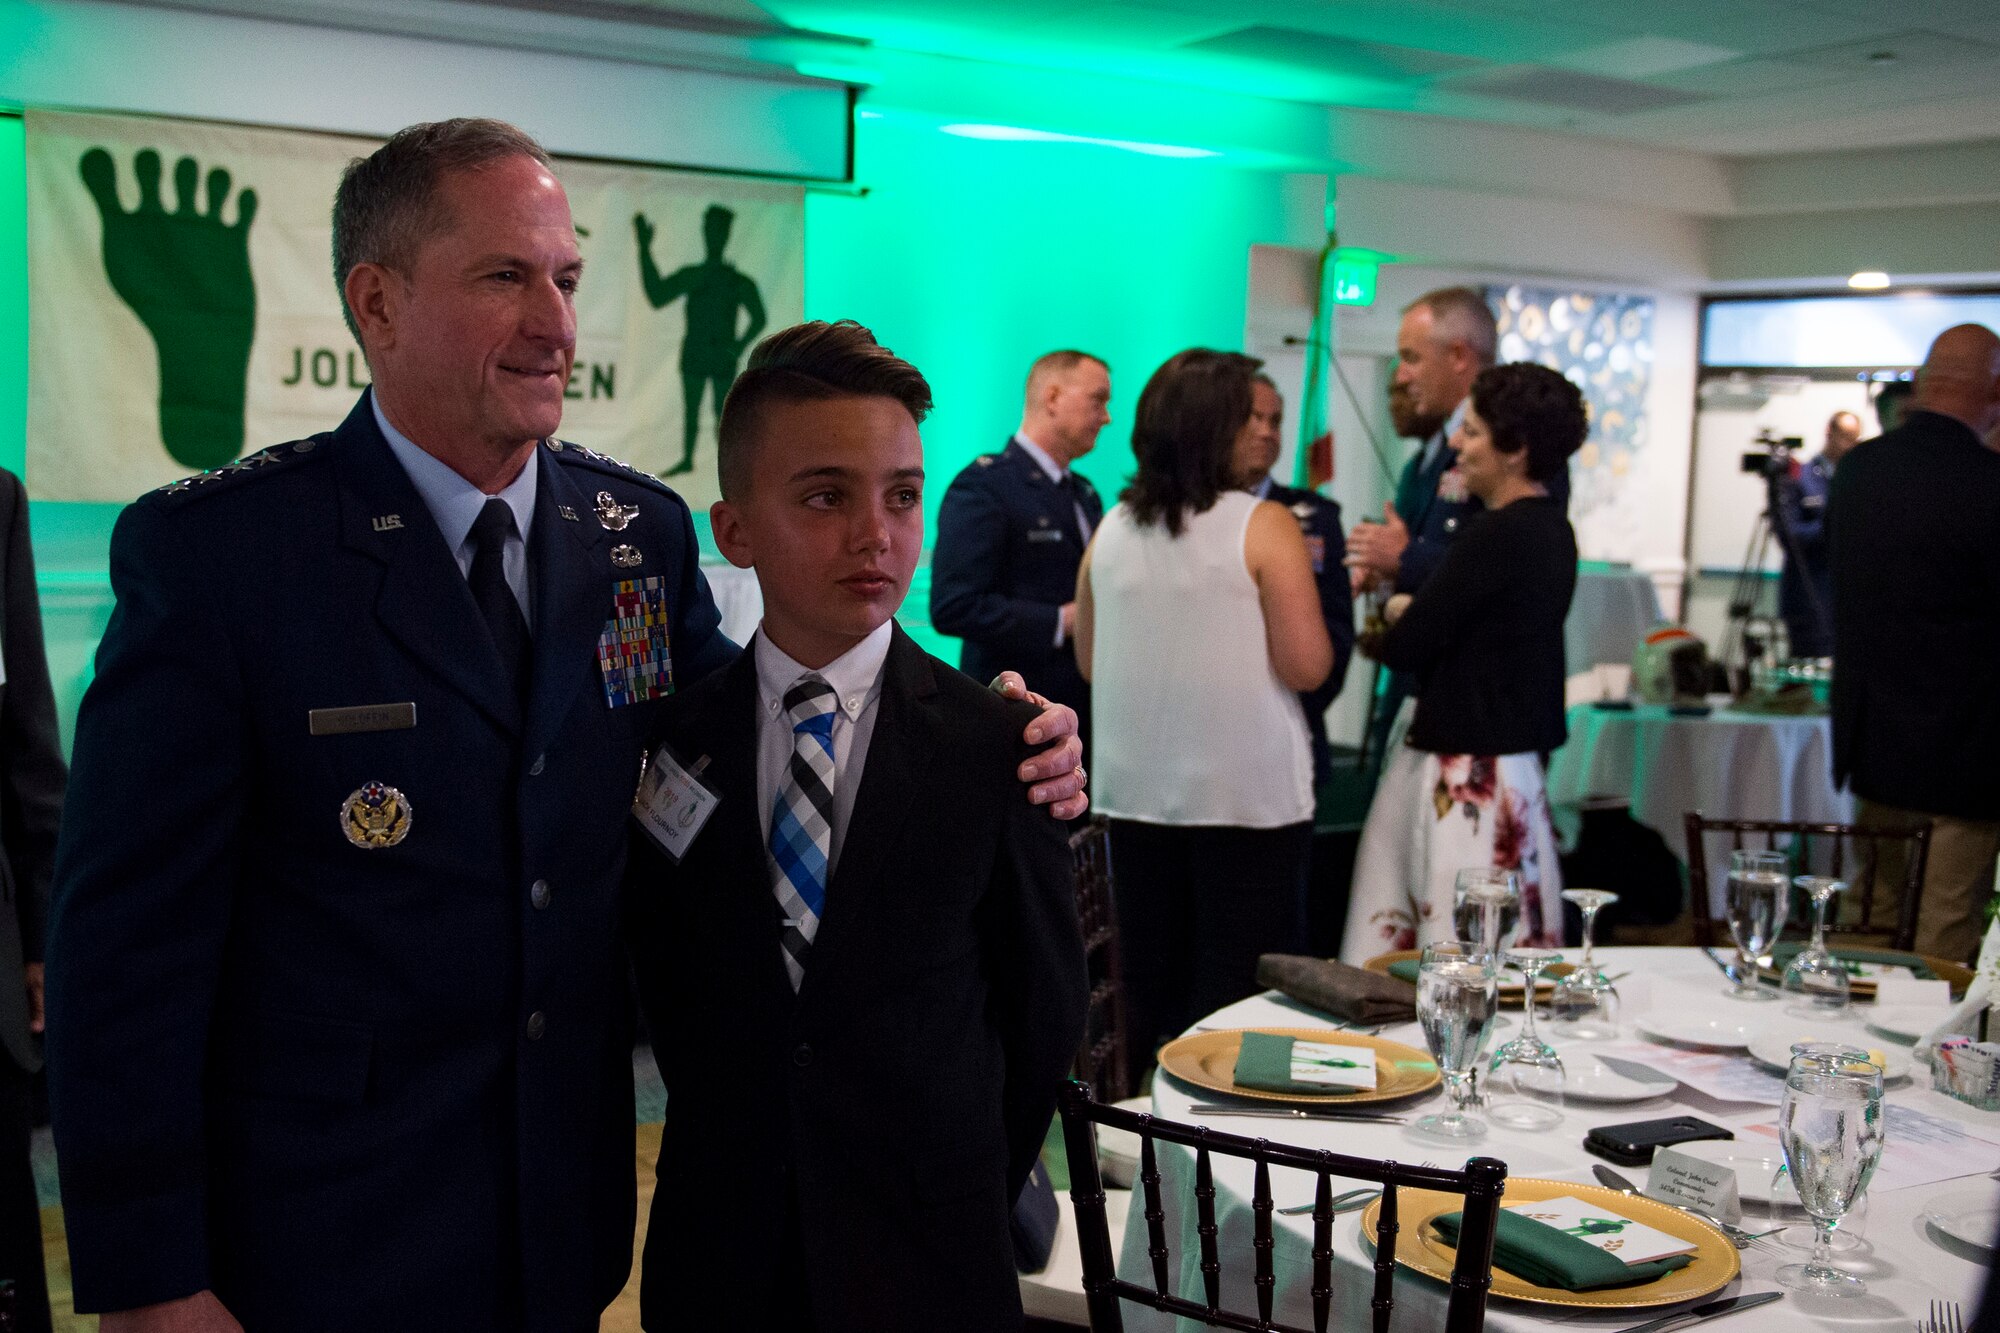 Air Force Chief of Staff Gen. David L. Goldfein, poses for a photo with young attendee Jack Flournoy, during the banquet celebrating the 50th reunion of the Jolly Green Association (JGA), May 4, 2019, in Fort Walton Beach, Fla. The JGA presented Airmen from the 41st Rescue Squadron (RQS) and the 48th RQS with the Rescue Mission of the Year award; the only non Air Force rescue award recognized by the Air Force. (U.S. Air Force Photo by Staff Sgt. Janiqua P. Robinson)